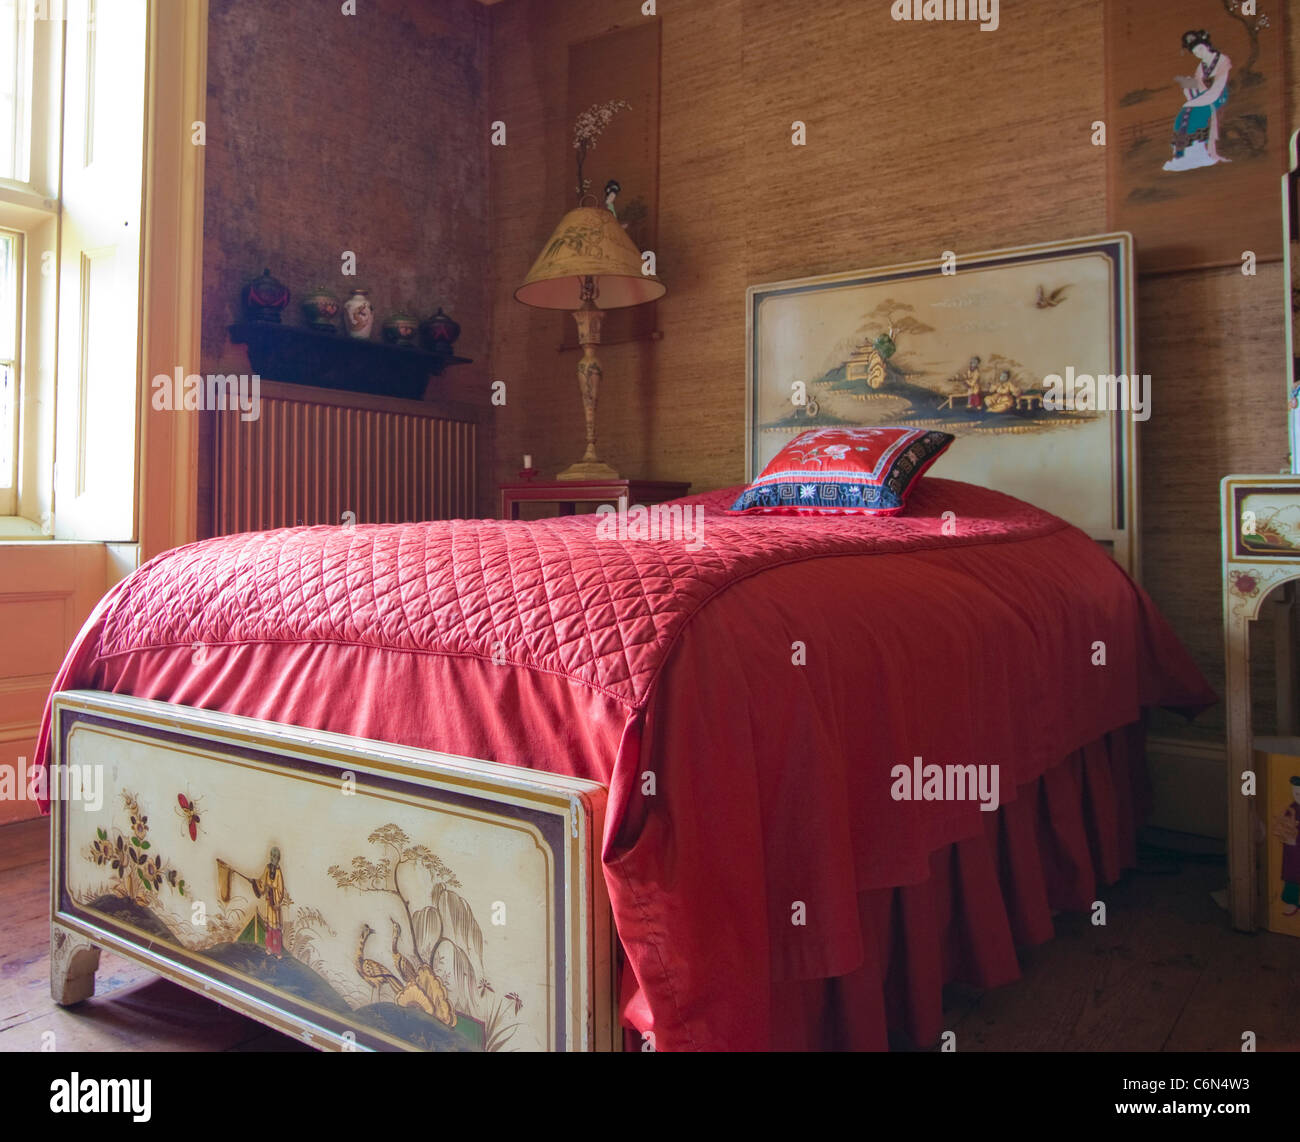 Fascinating asian style bed frames Chinese Style Bedroom And Bed In Old House Stock Photo Alamy